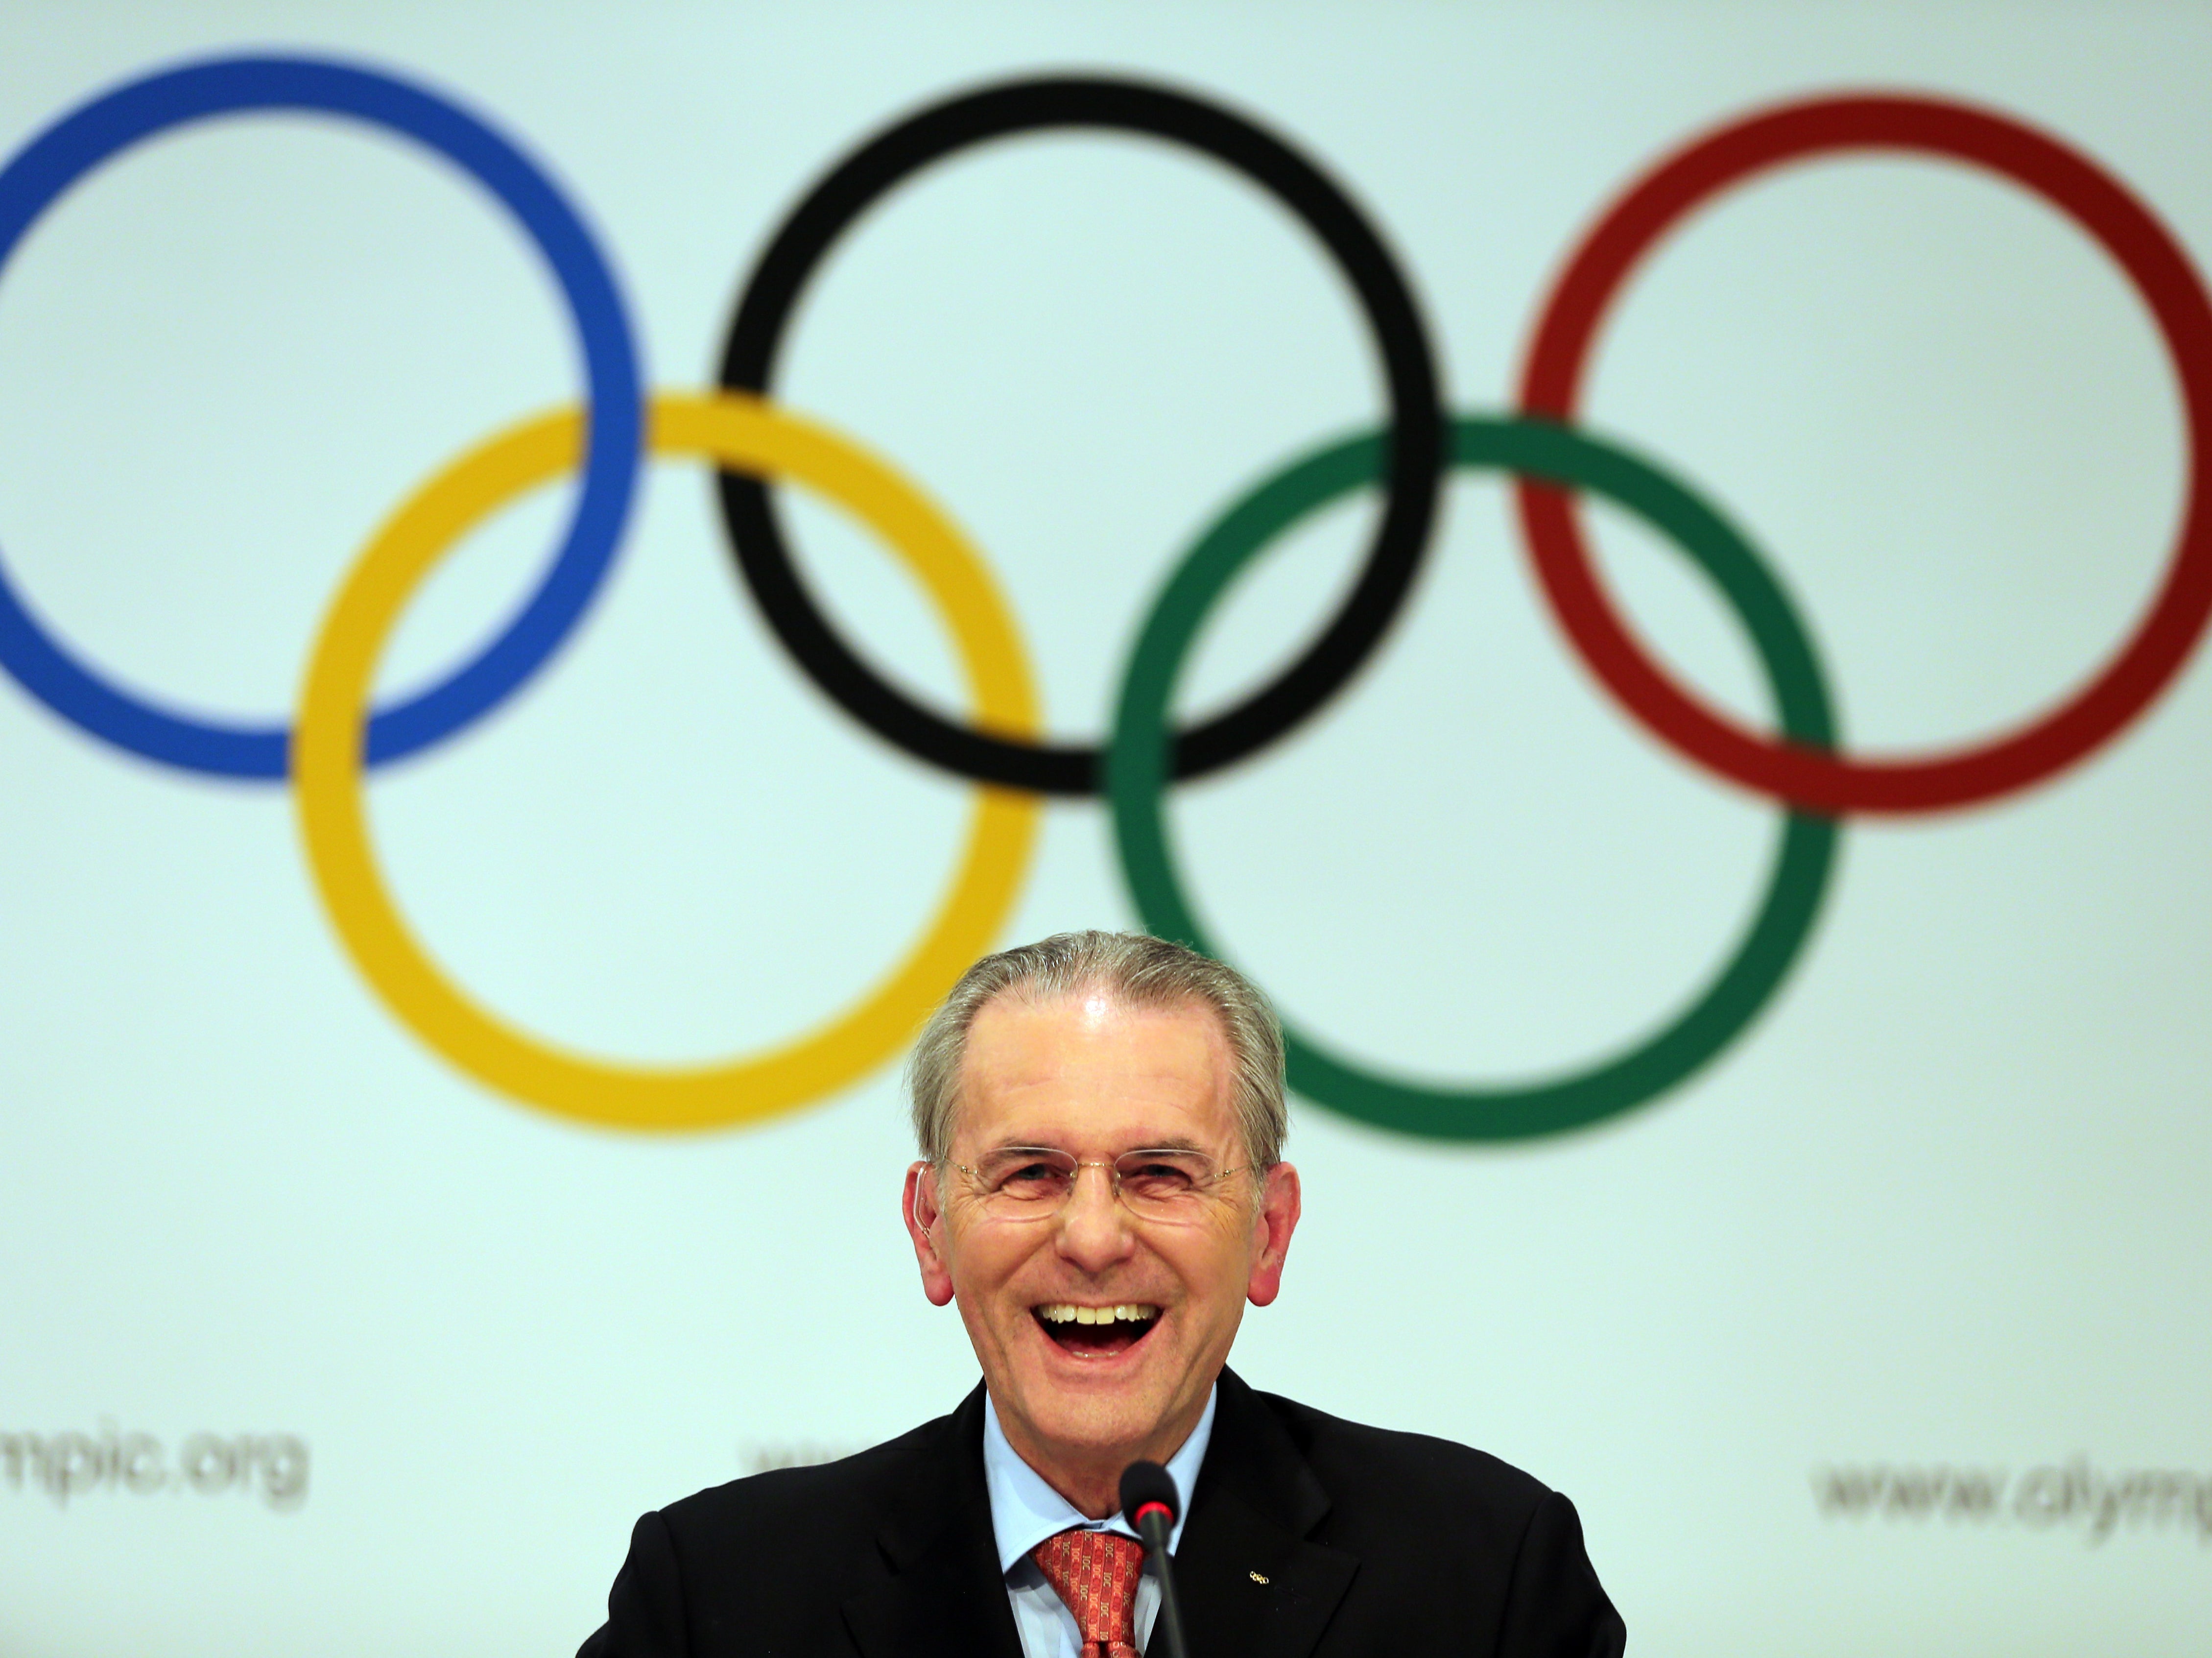 Rogge was decisive in tackling the persistent abuse of unauthorised performance enhancers through cooperation with the World Anti-Doping Agency